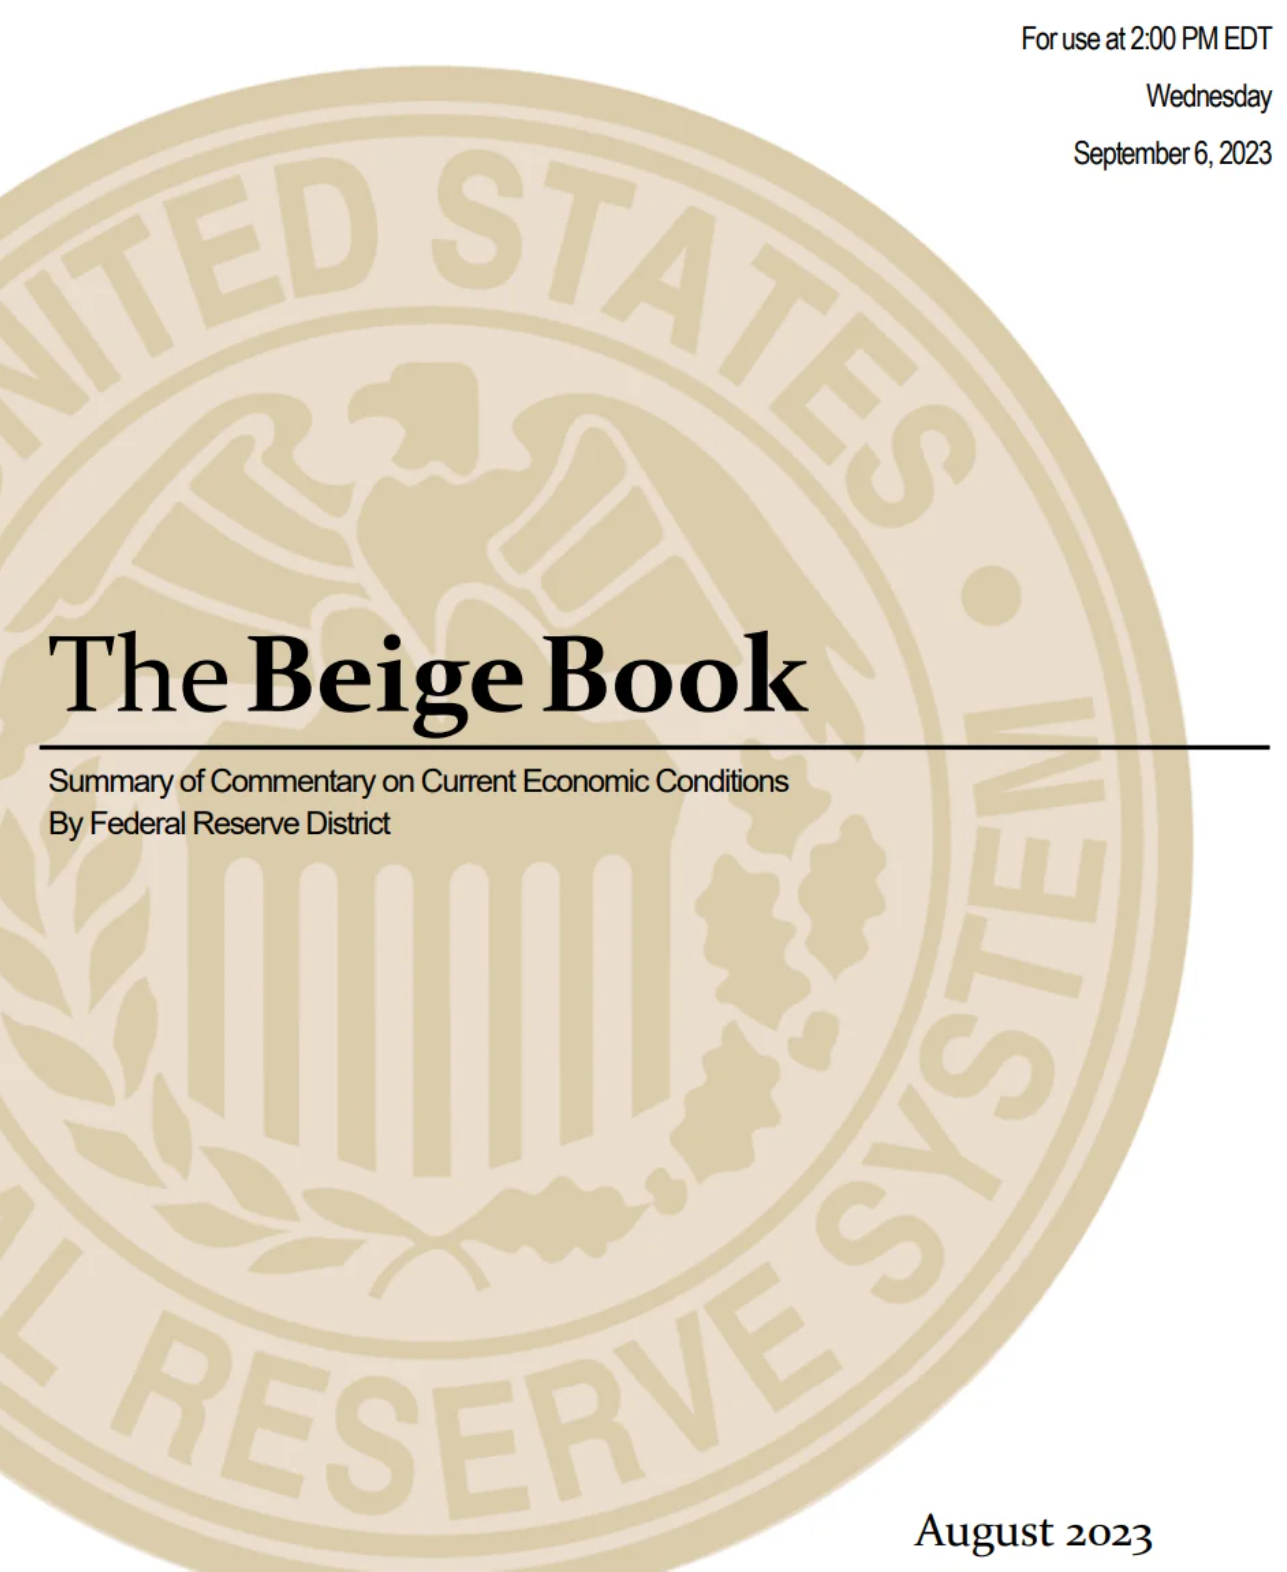 Fed's Beige Book August 2023: "Some Districts highlighted reports suggesting consumers may have exhausted their savings and are relying more on borrowing to support spending."